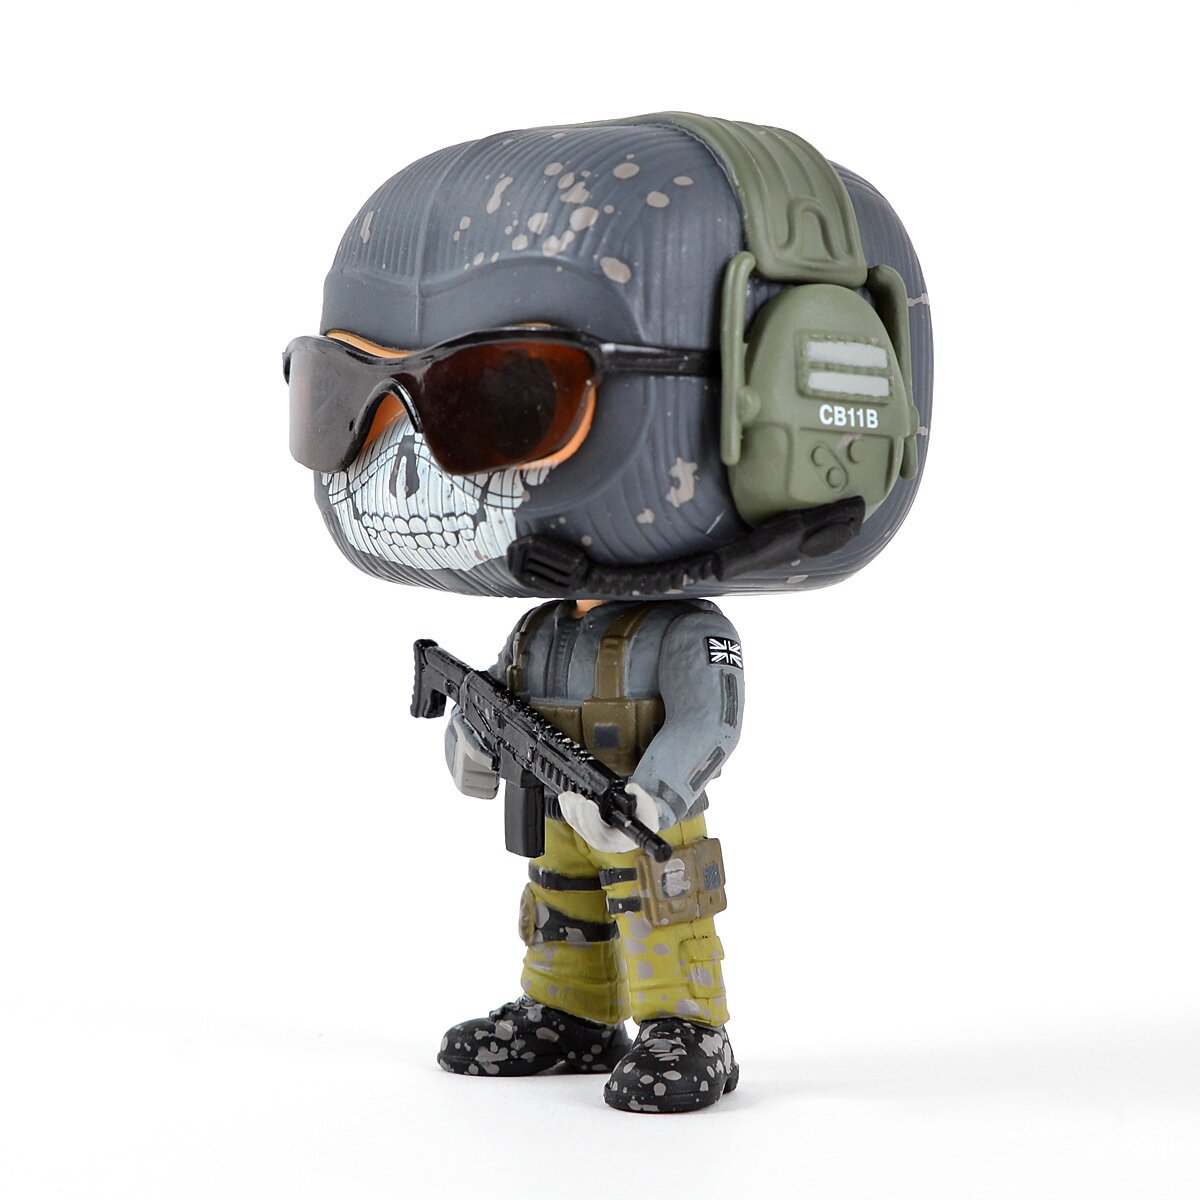  Funko POP Games: Call of Duty Action Figure - Riley